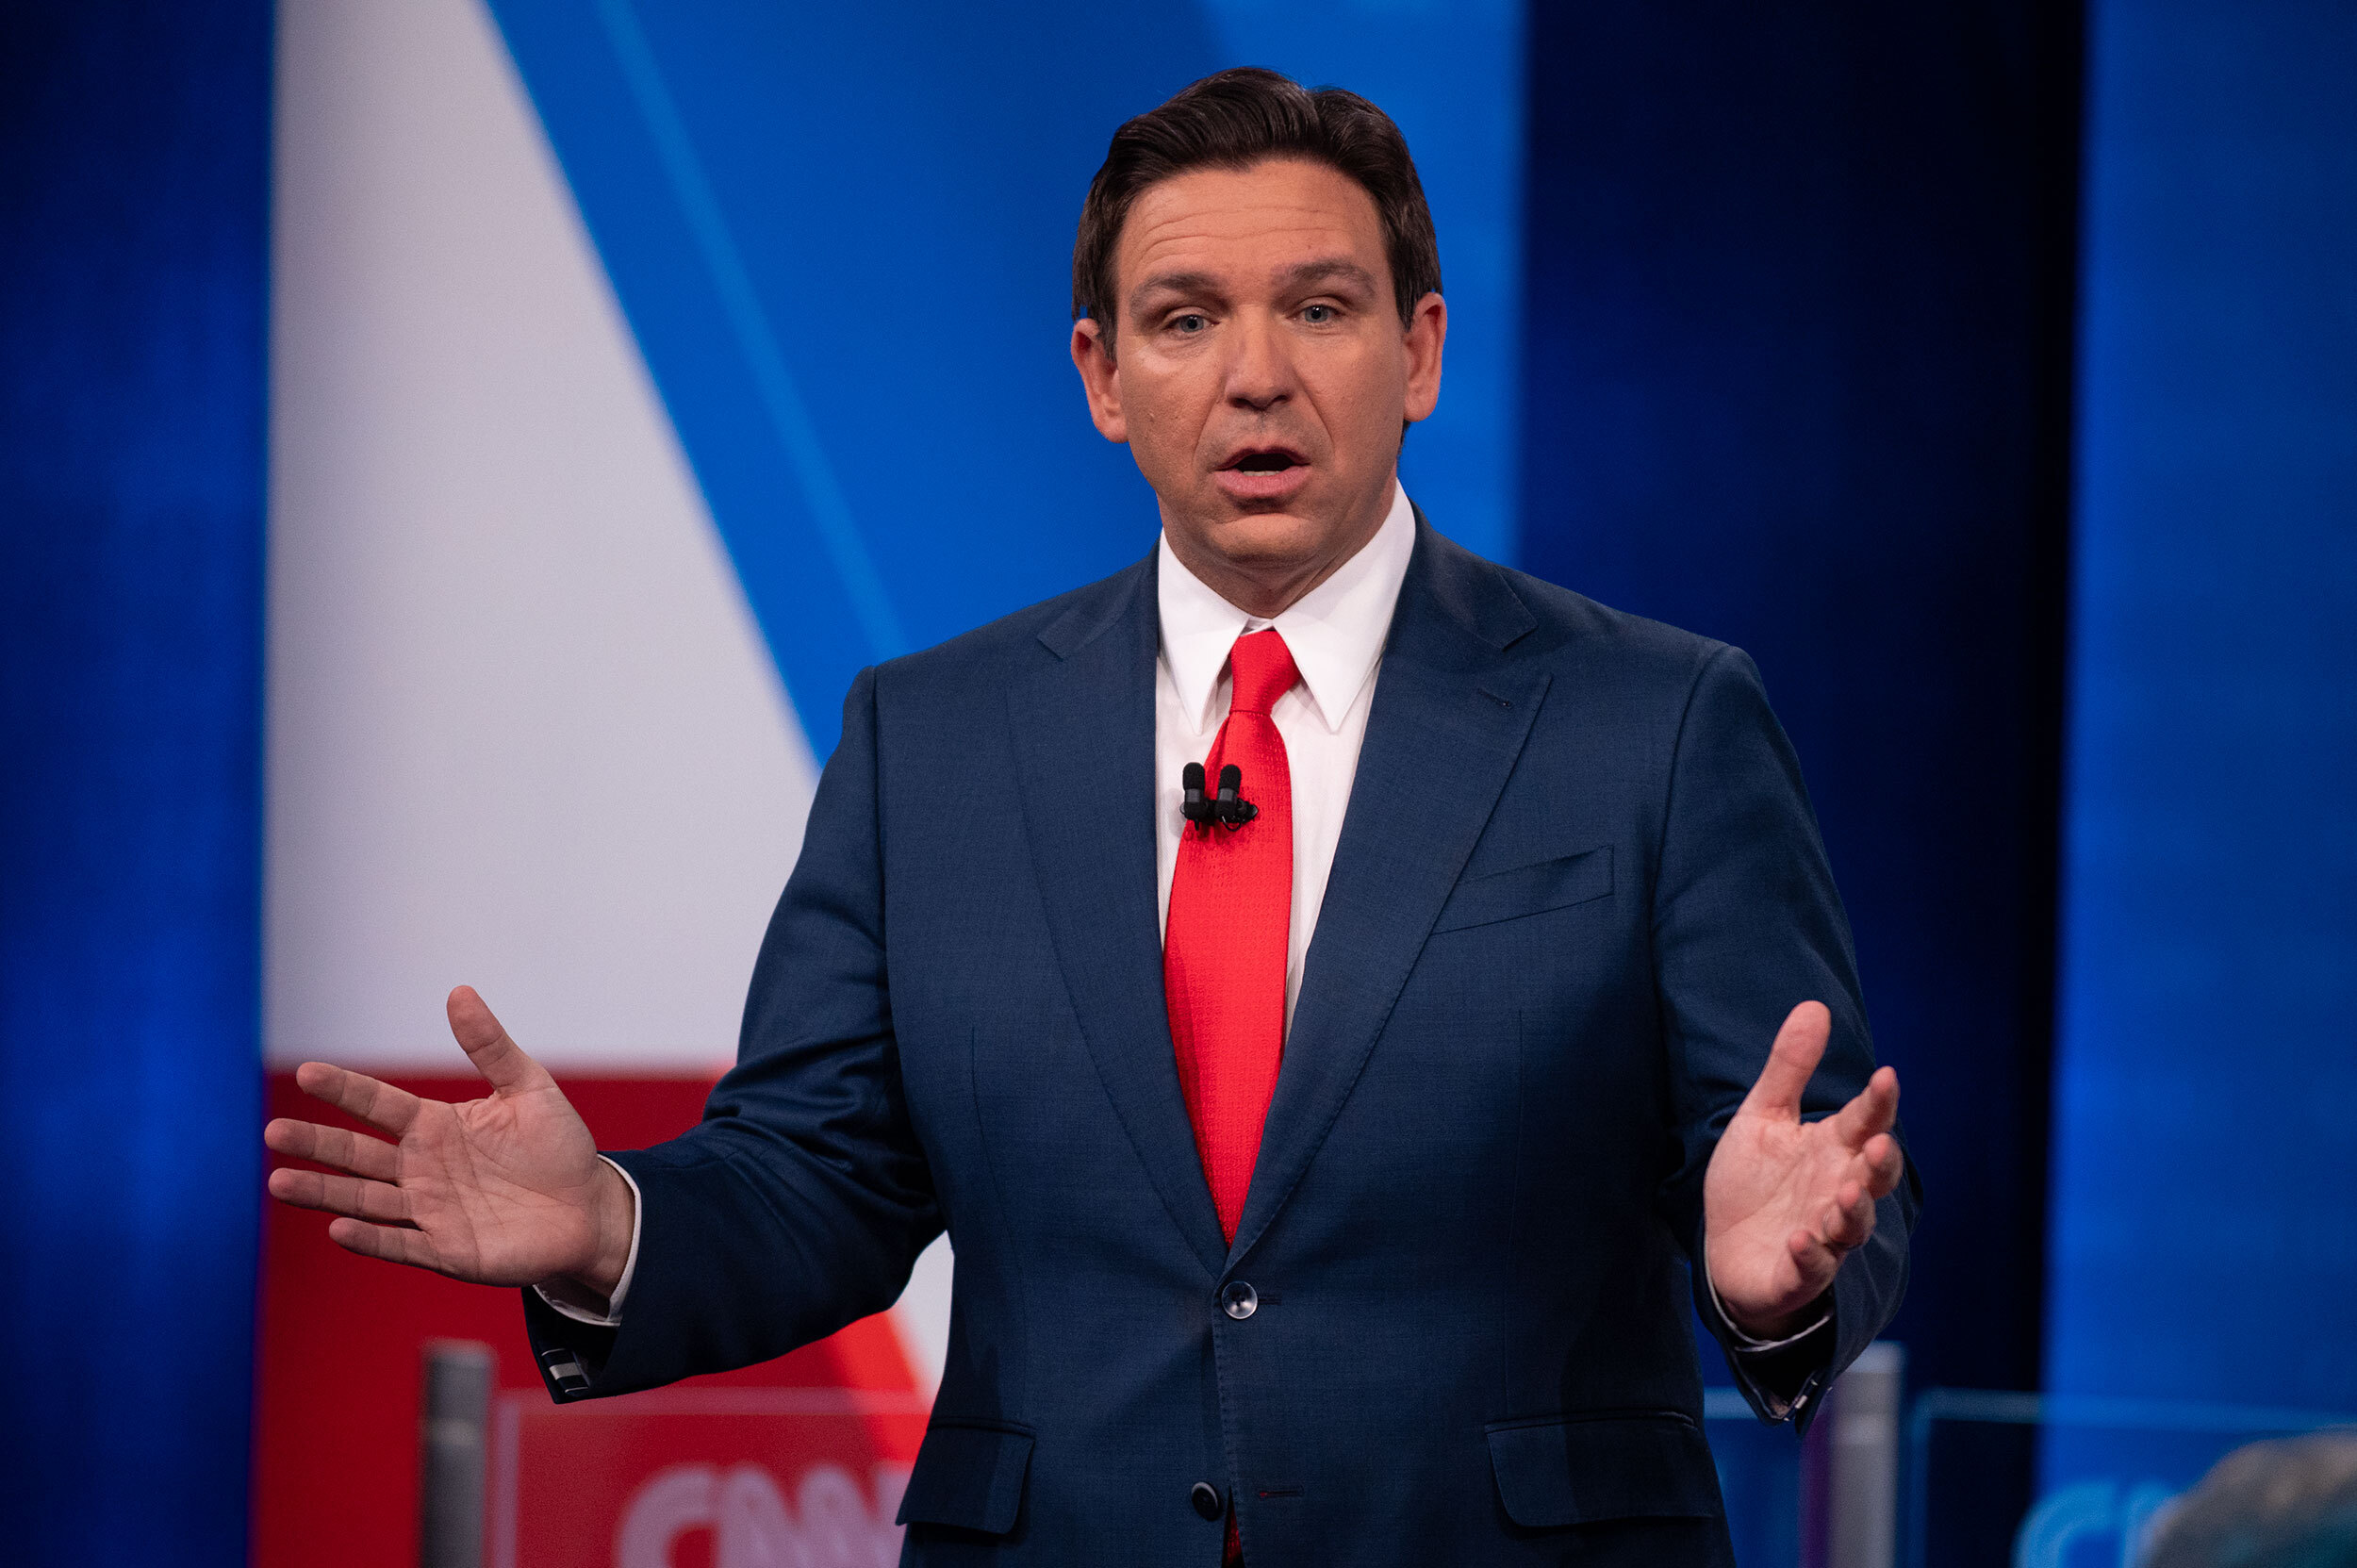 Florida Gov. Ron DeSantis came out of the gate with a clear focus on closing his polling gap in the Hawkeye State with Trump.